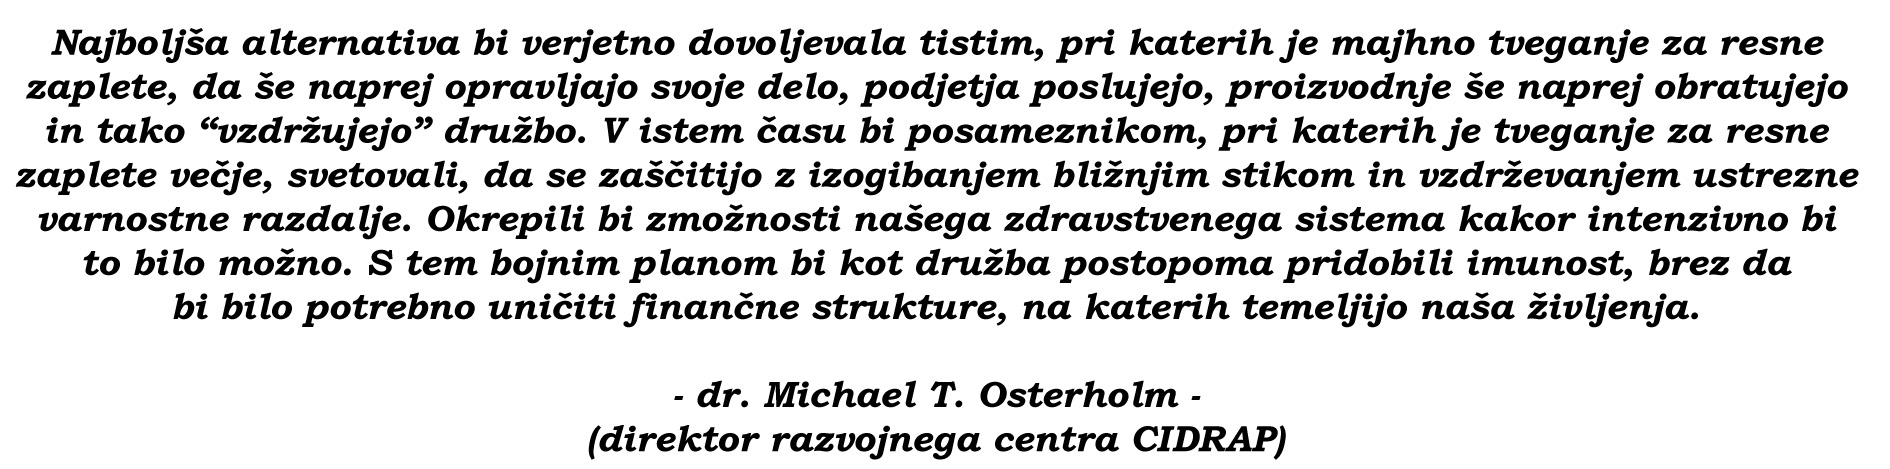 osterholm quote 2